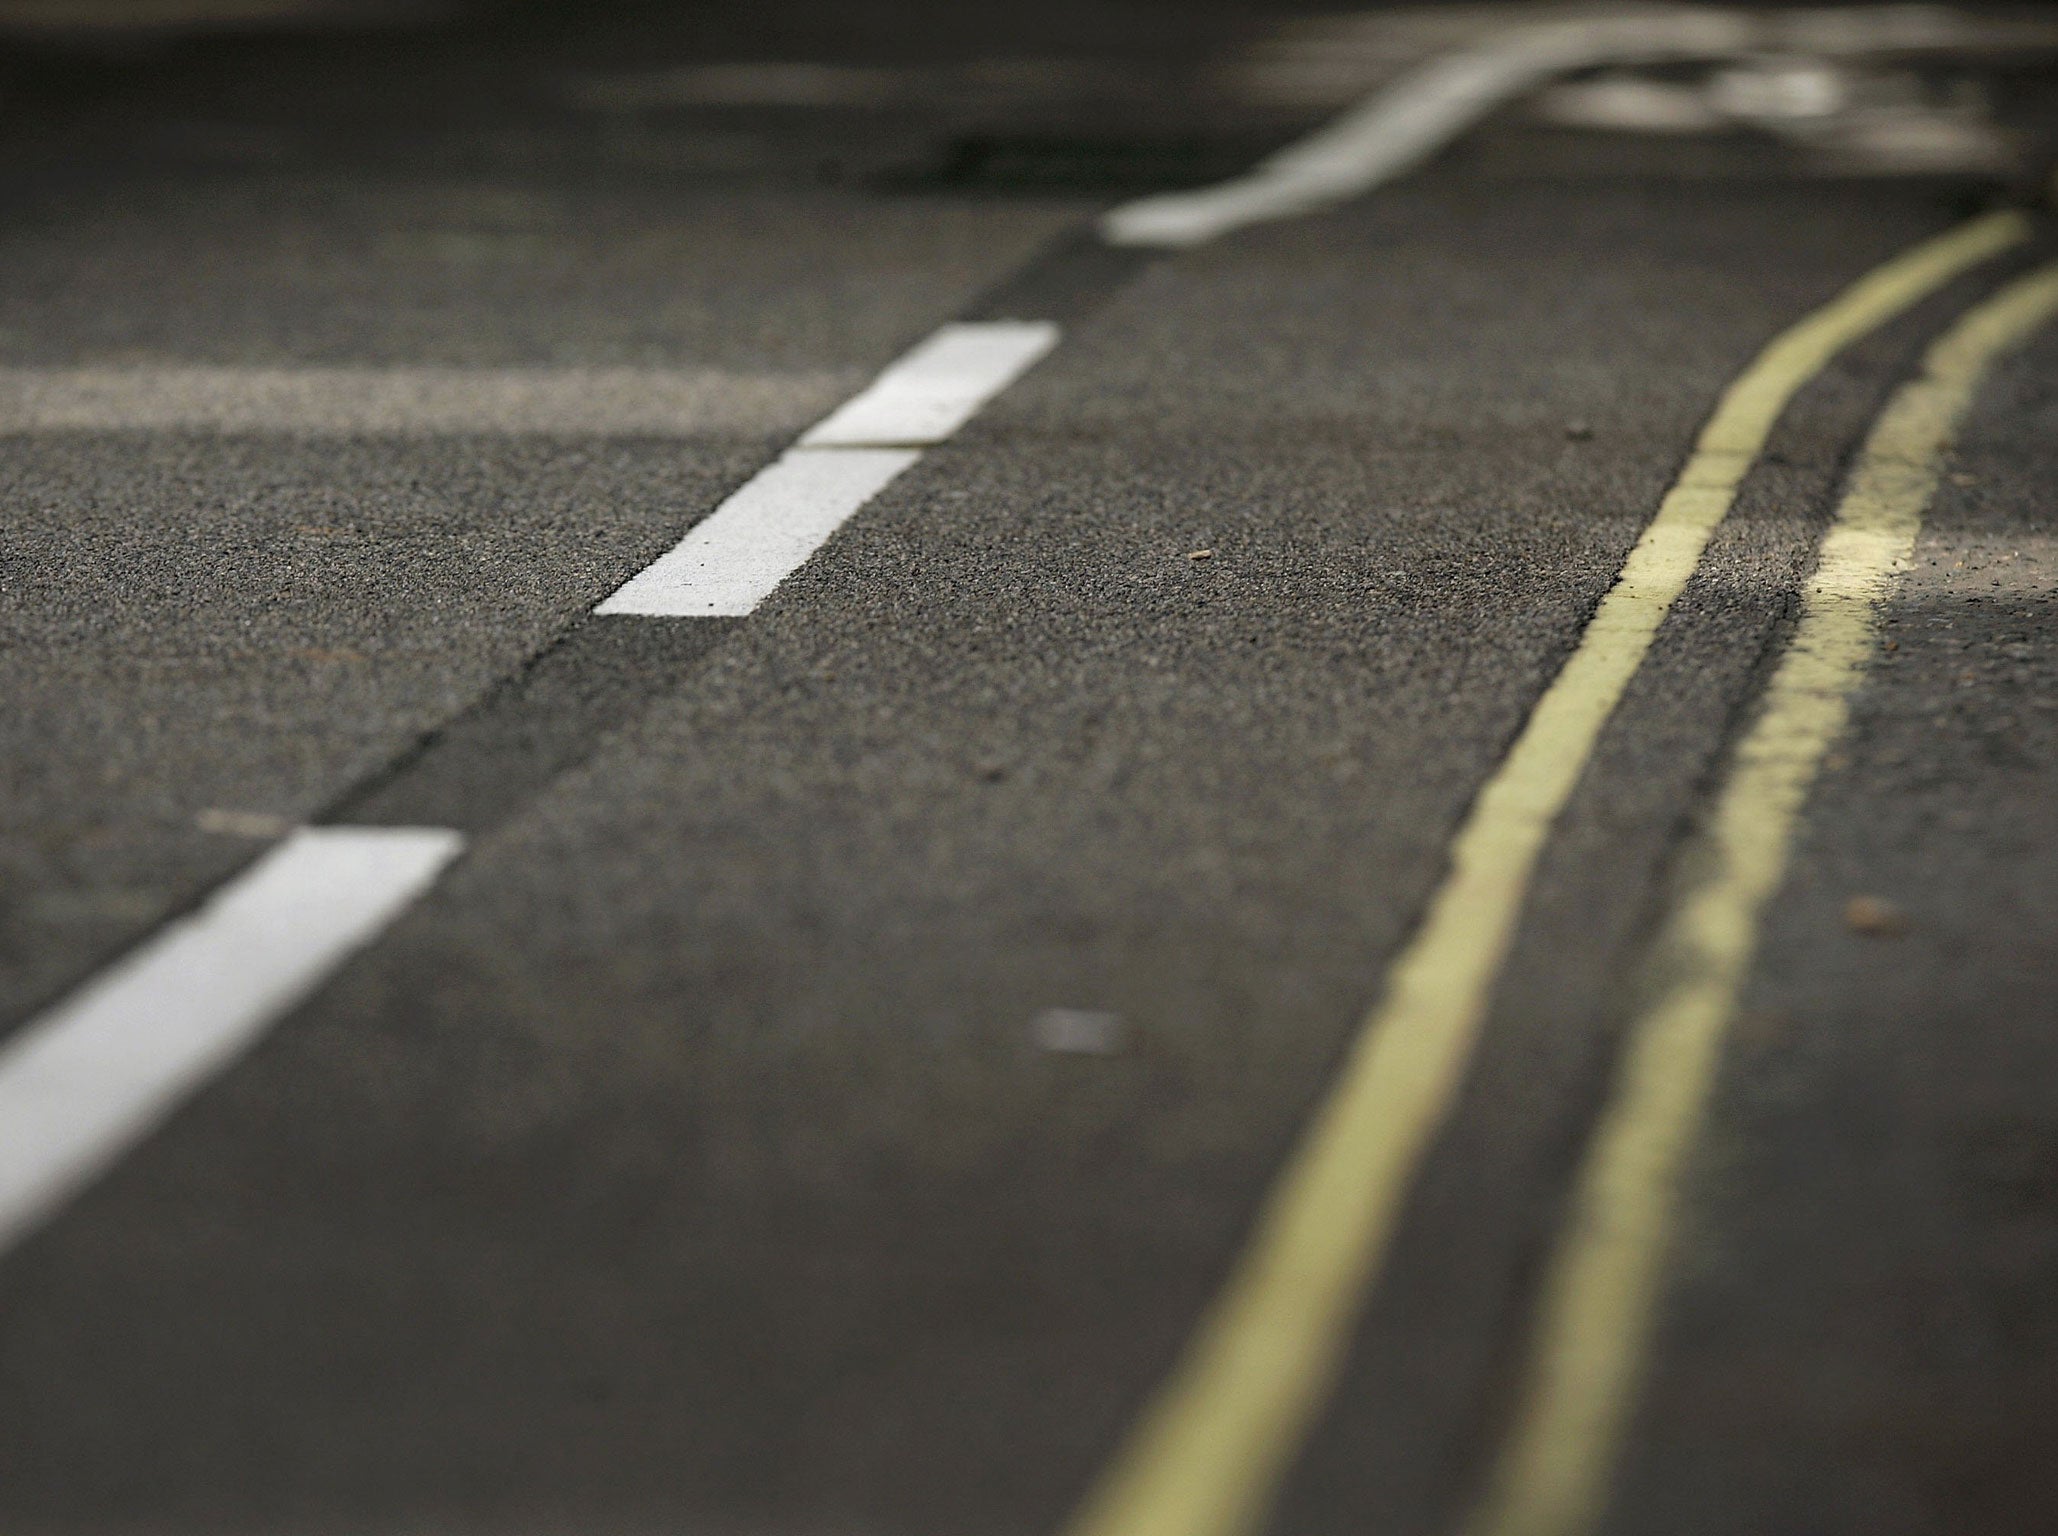 Suspicious road markings have been spotted in Warwickshire